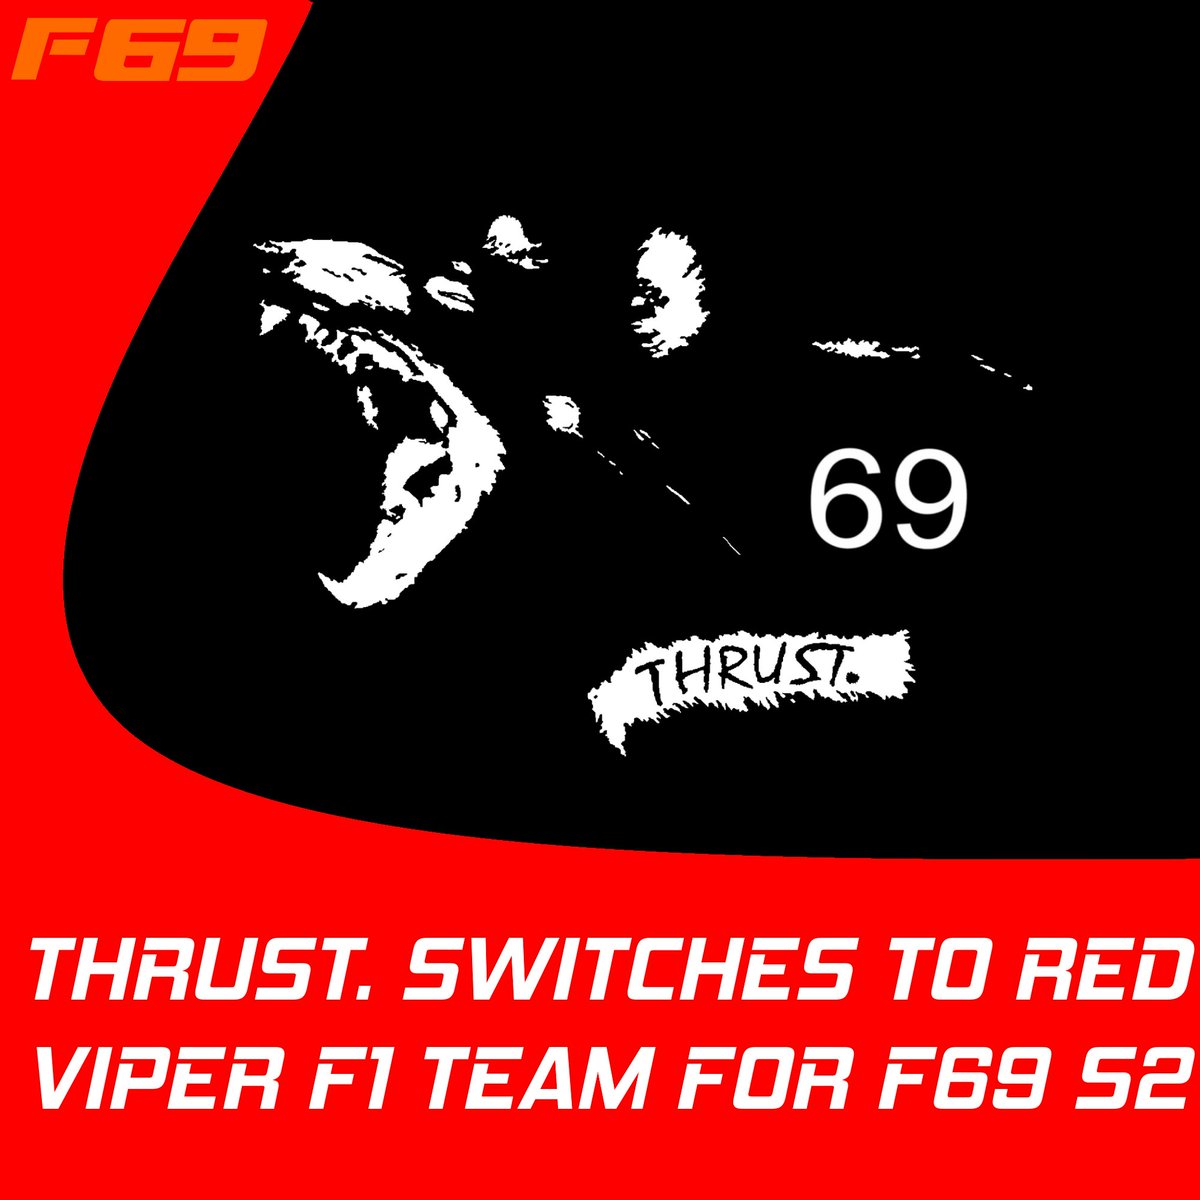 BREAKING: Red Viper F1 Team confirmed for Formula 69 S2!✅✅ The new team with The Reserve Drivers' Yara and Fast Fellas' THRUST will race together in the next season of Formula 69. They will drive in the new Ferrari 2022 car. #Formula69 #F69 #F69S2 #Formula1 #F1 #F12022